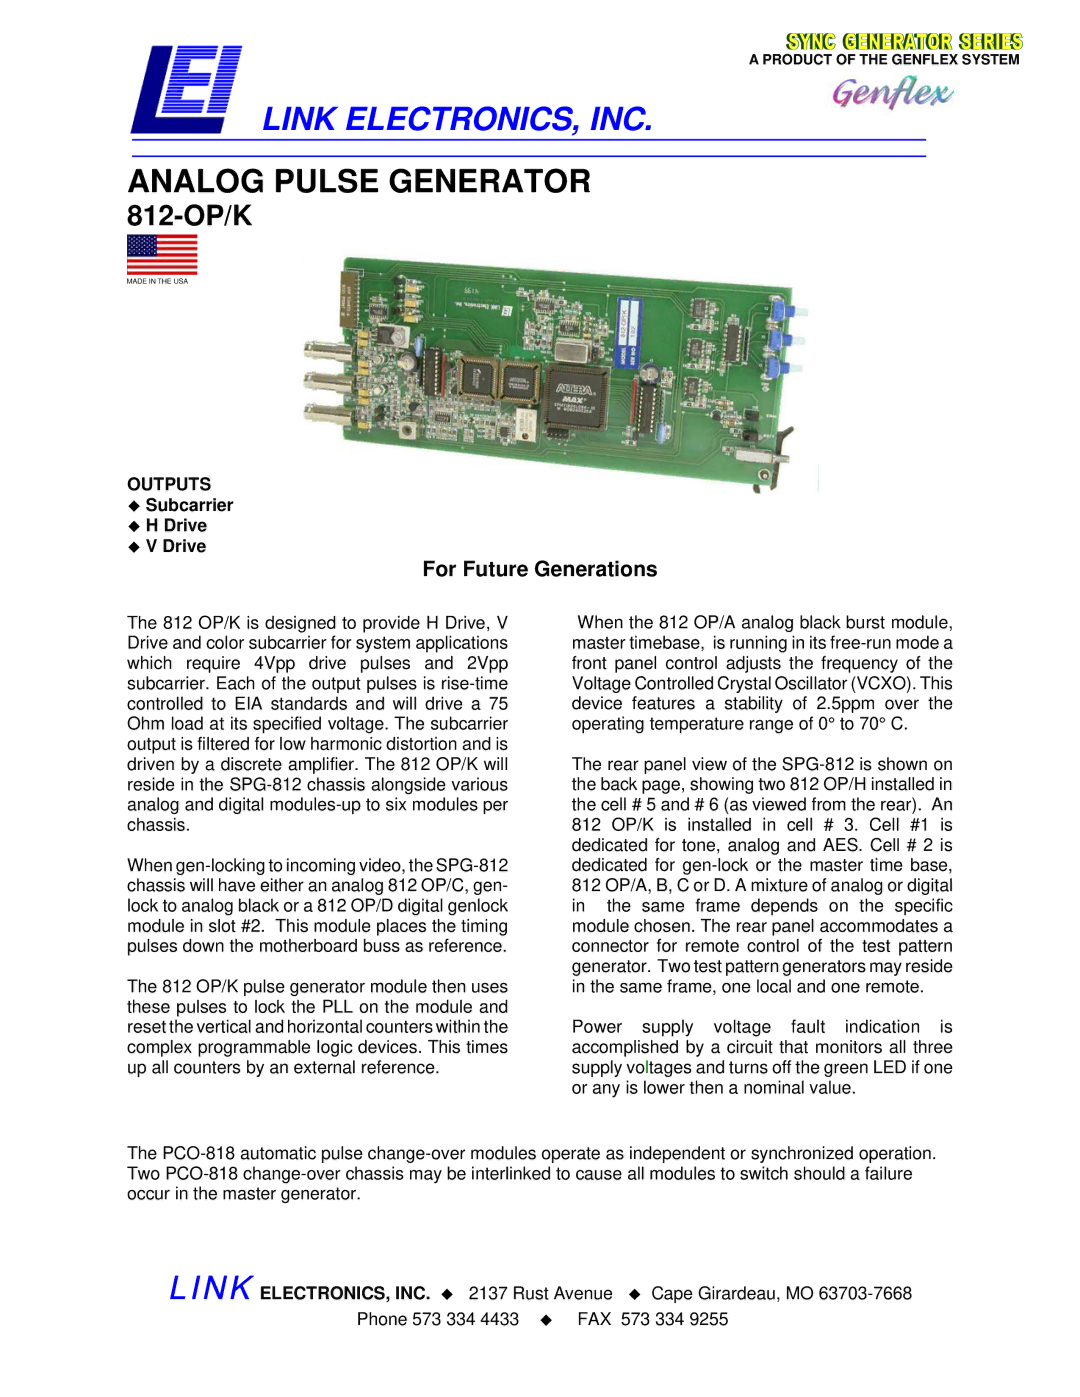 Link electronic 812-OP/K manual Link ELECTRONICS, INC, Analog Pulse Generator, For Future Generations, Outputs 